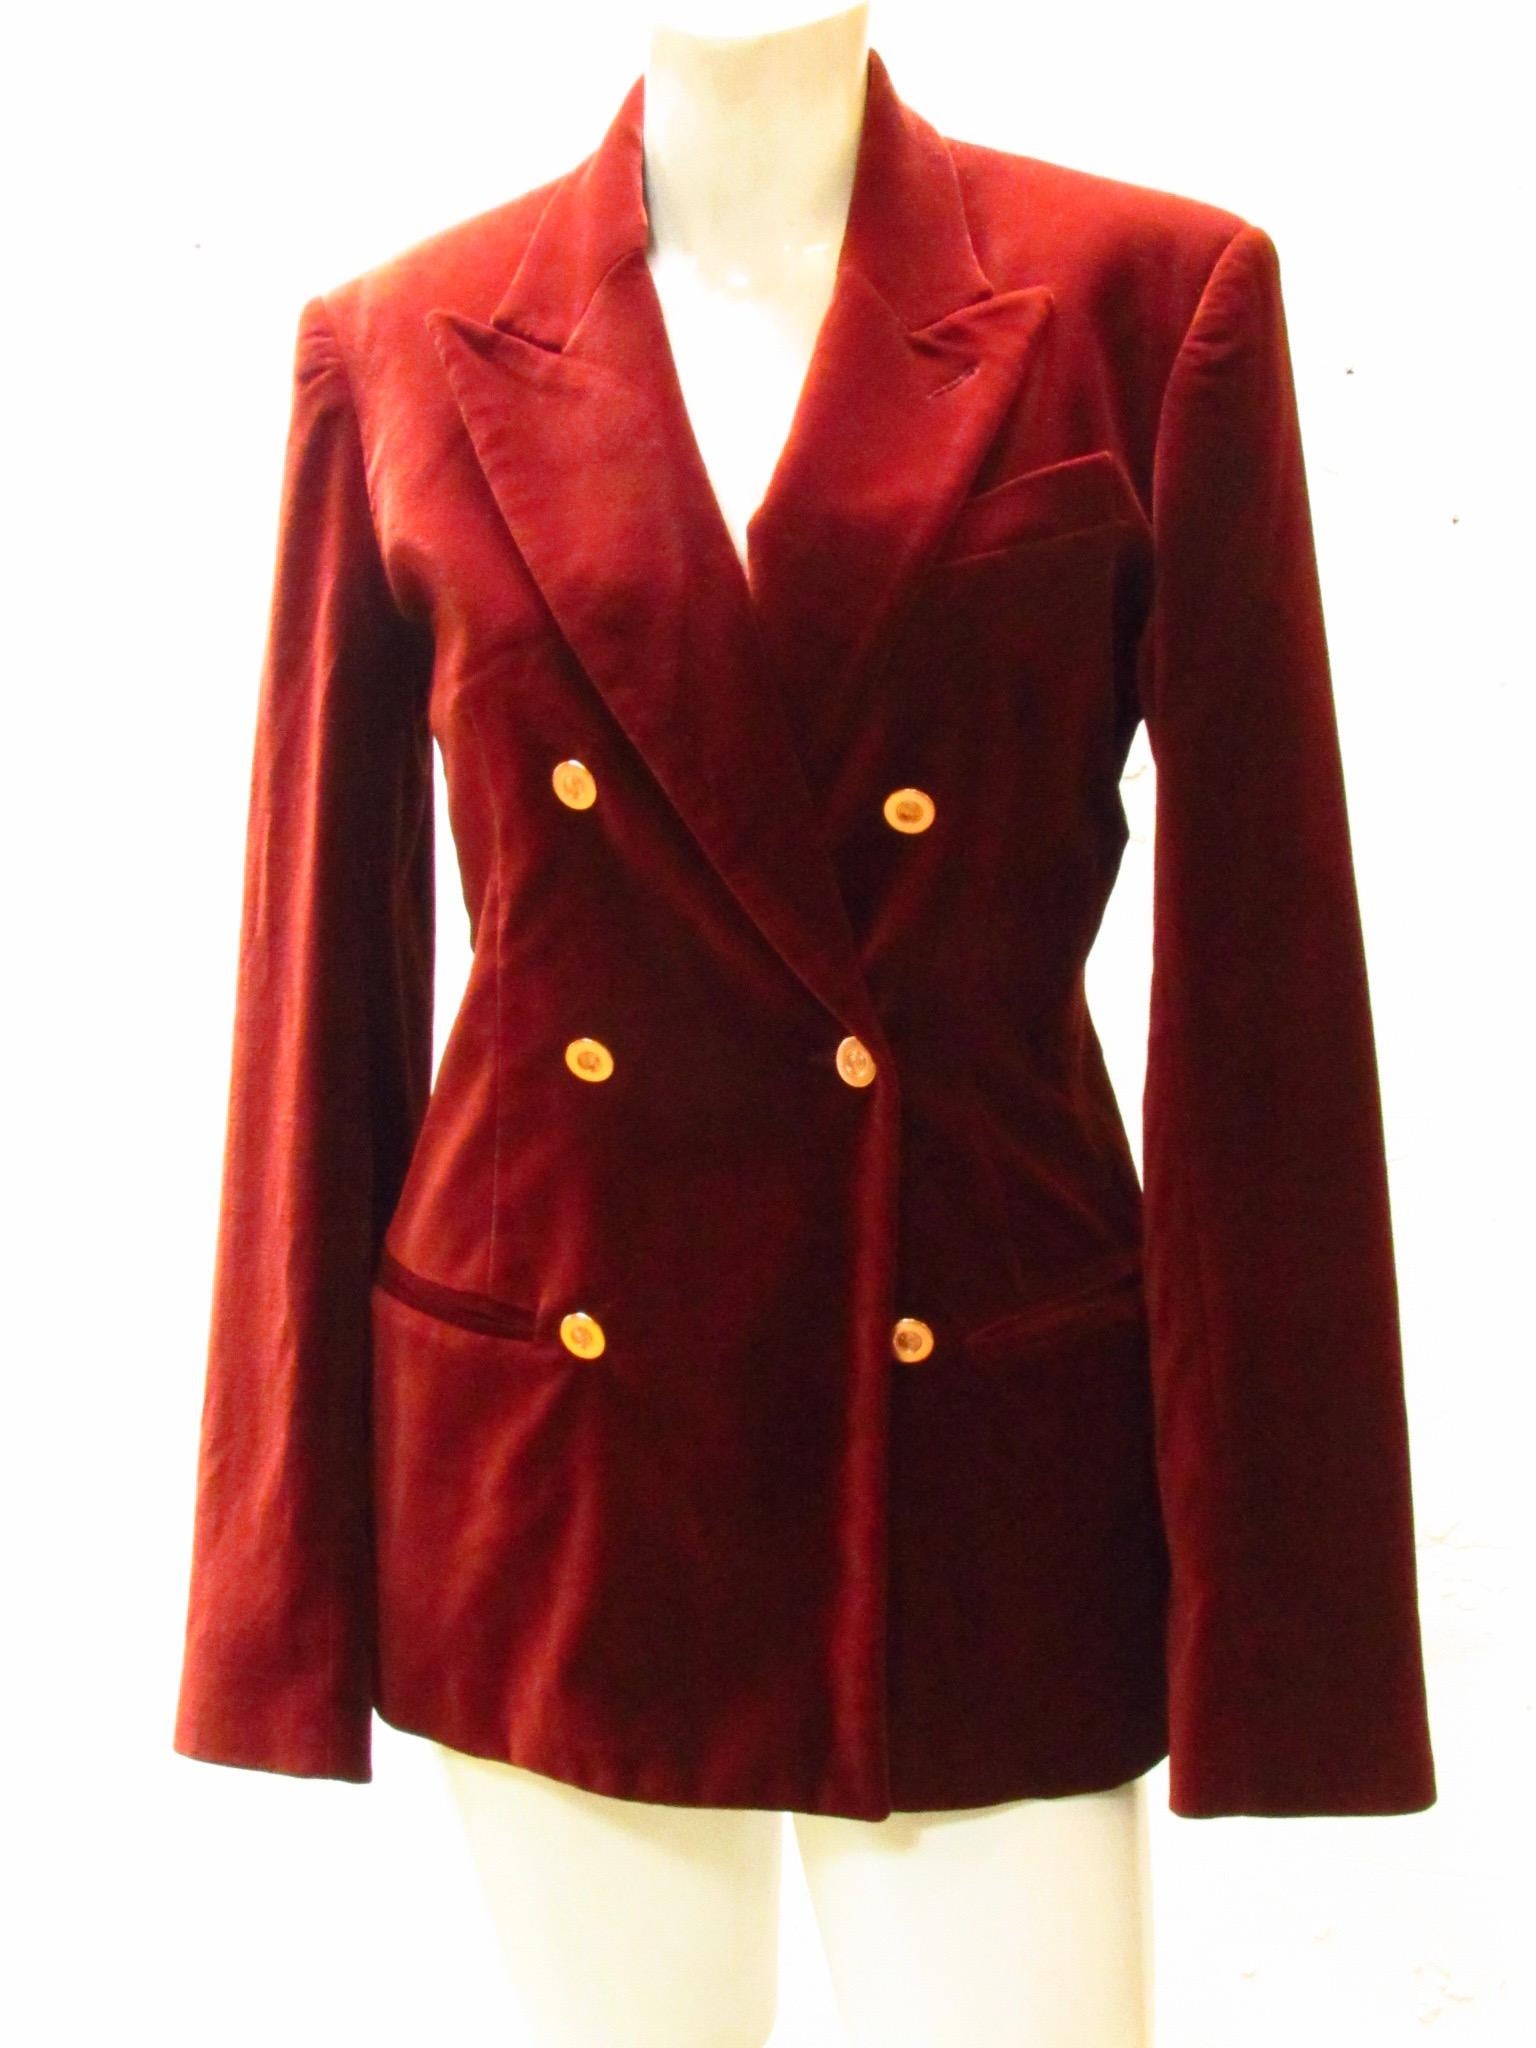 Double breasted cotton velvet jacket from Jean Paul Gaultier in a rich rust color. Metal buttons  showcase the JPG logo. The lining is replete with fanciful versions of the logo.